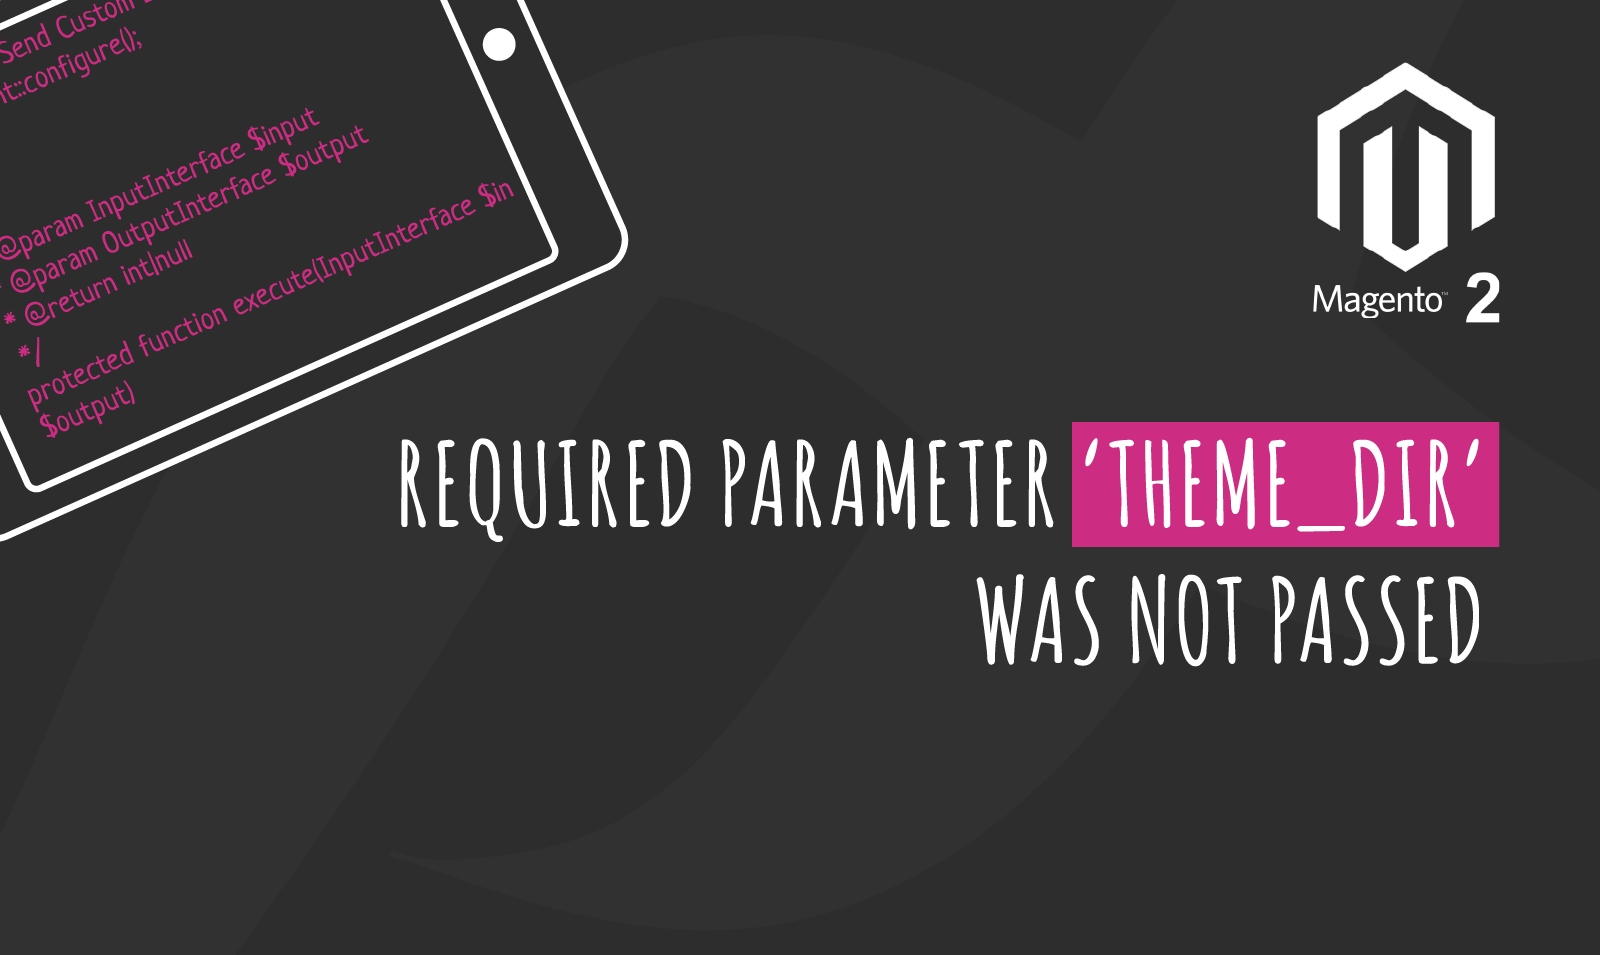 Required parameter 'theme_dir' was not passed